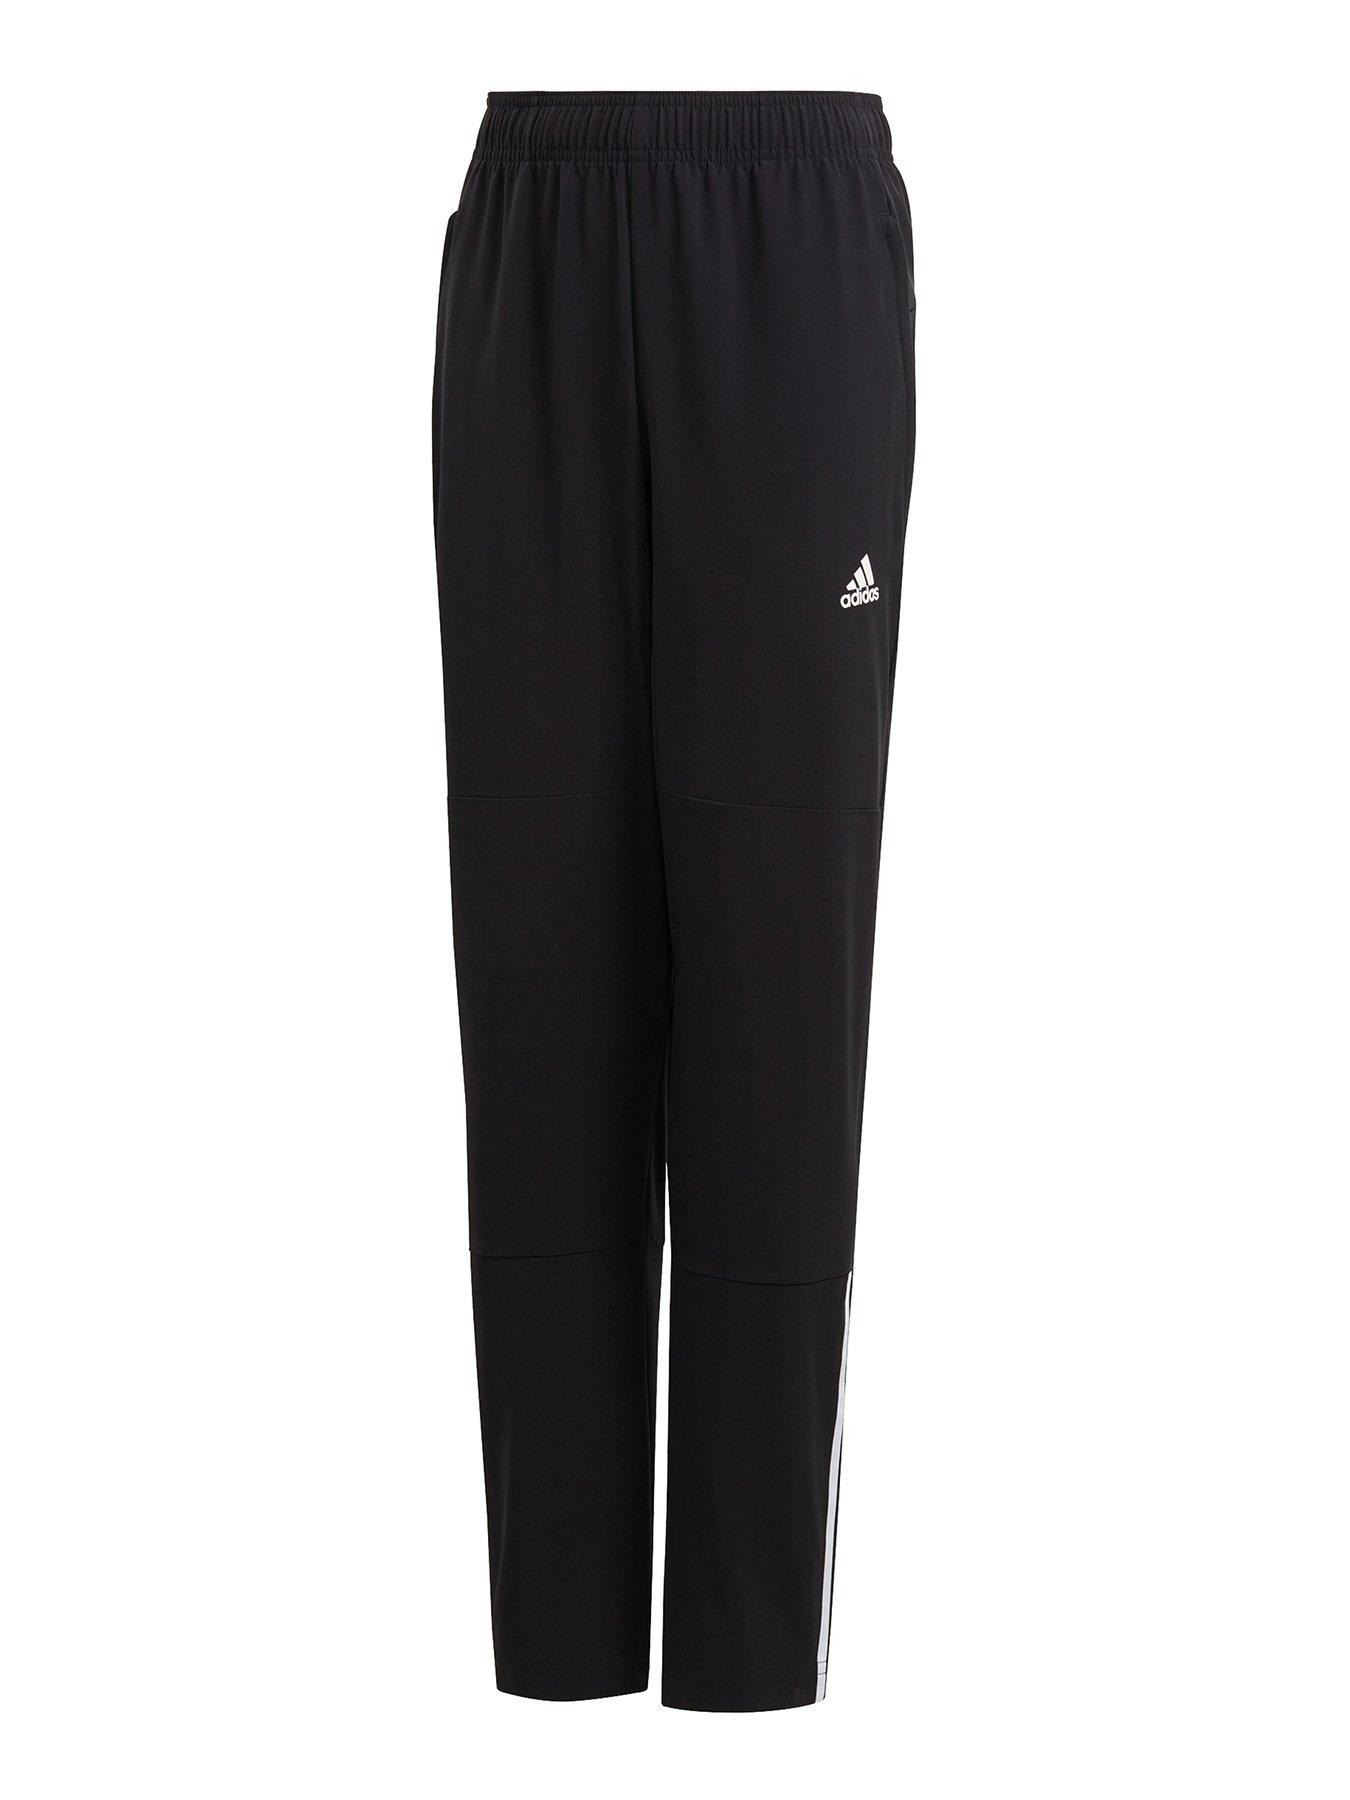  Youth Boys Track Equip Woven Pants - Black